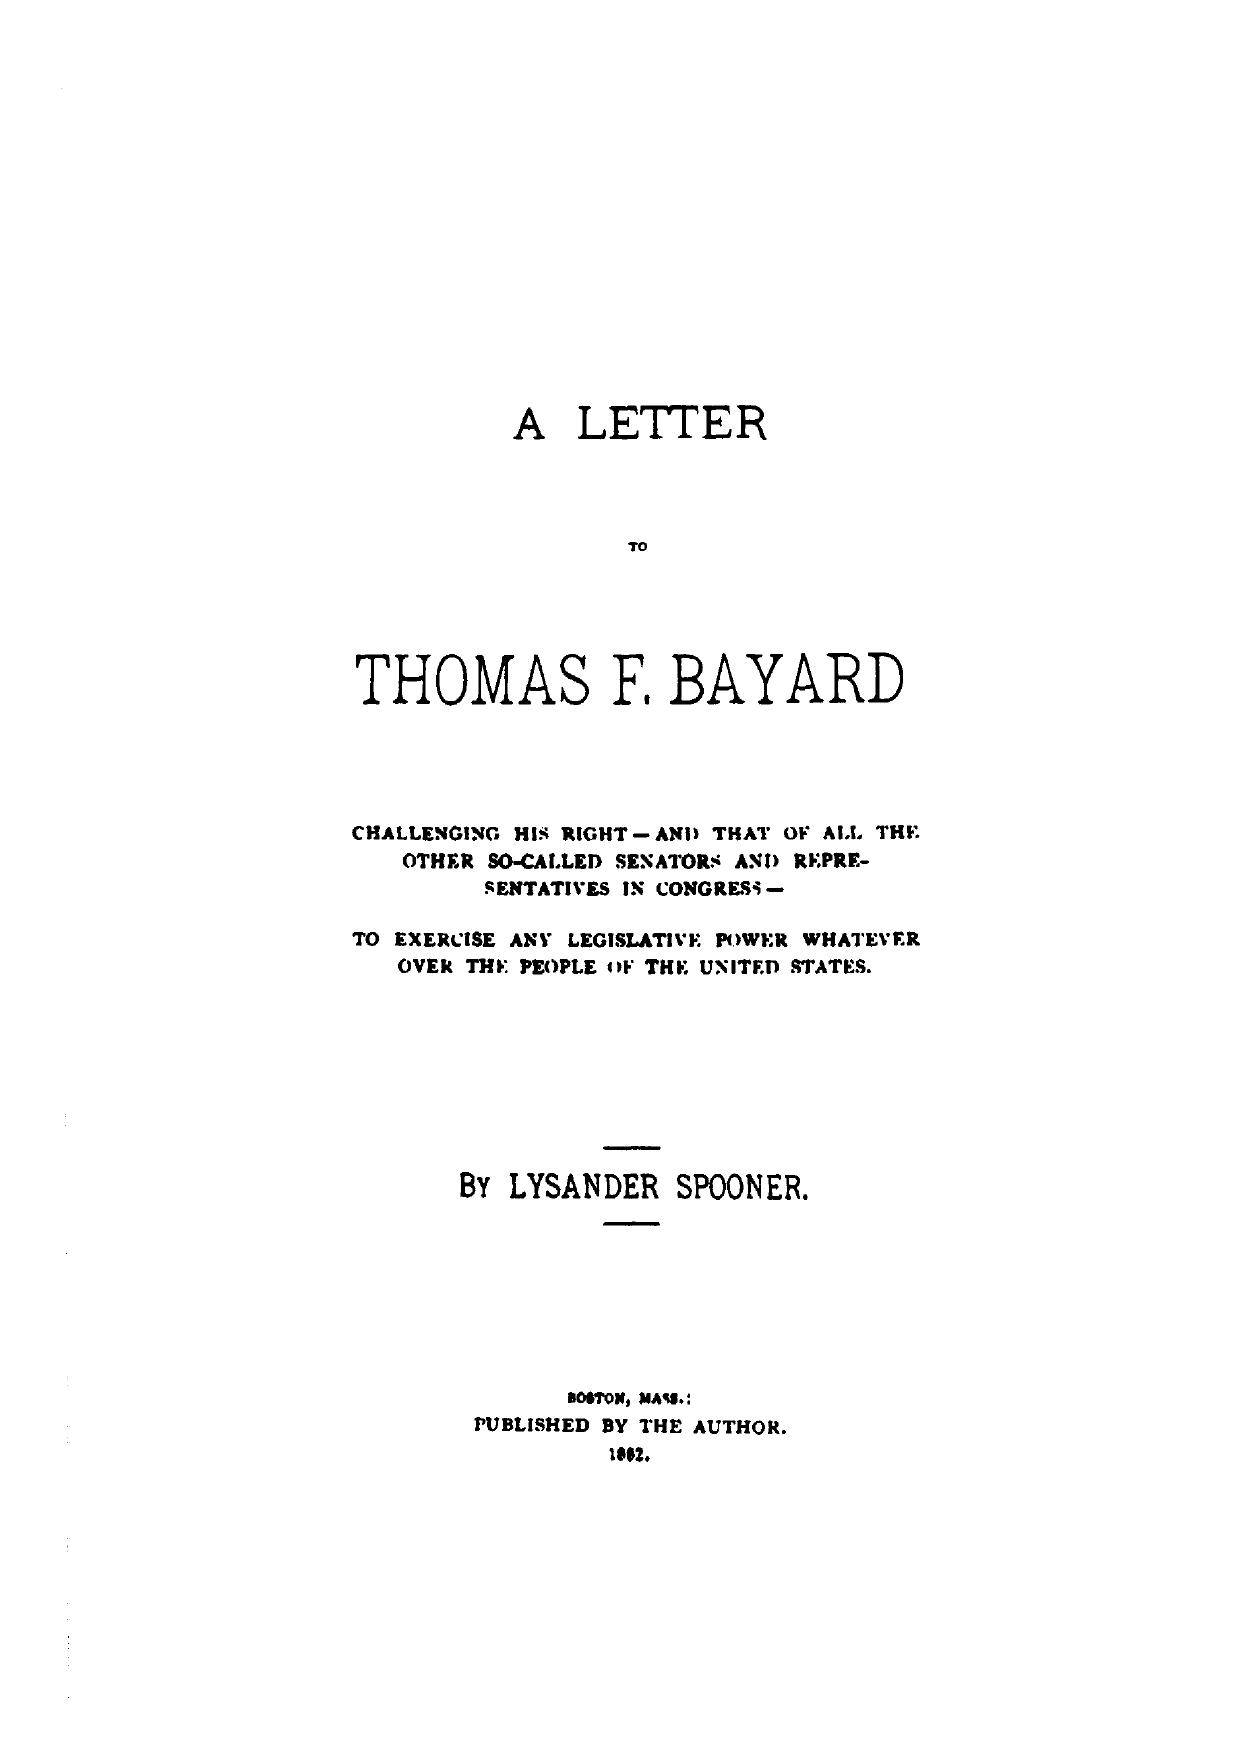 A Letter to Thomas F Bayard (1882) by Lysander Spooner